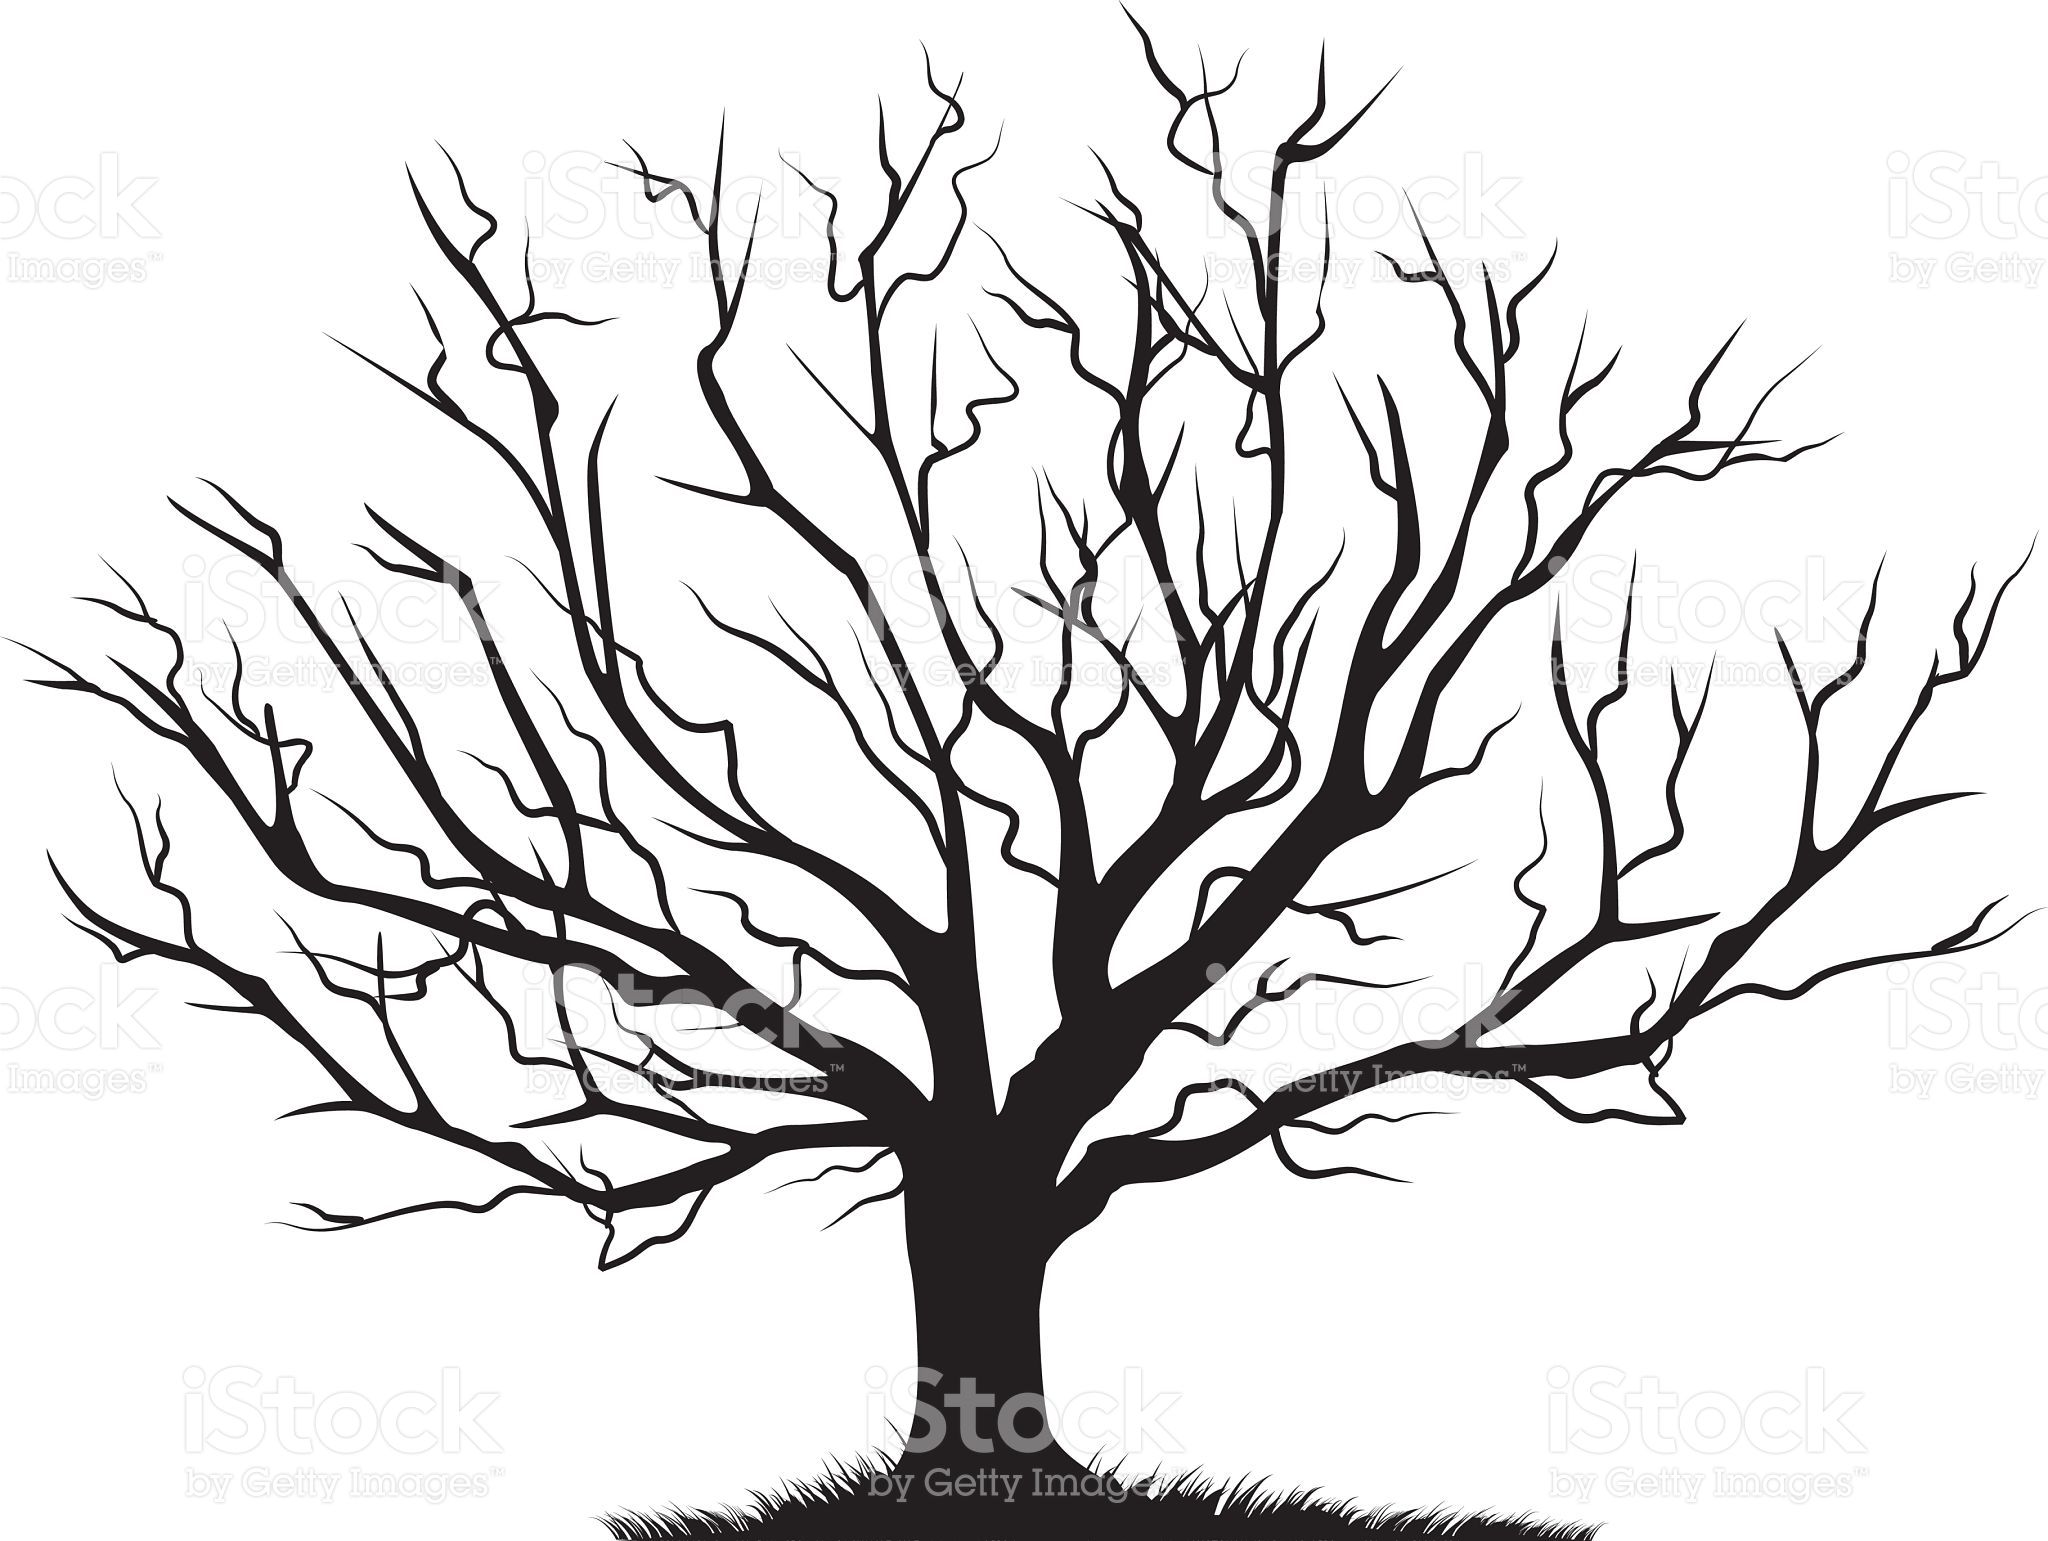 Deciduous Bare Tree with Empty Branches Black Silhouette isolated on.